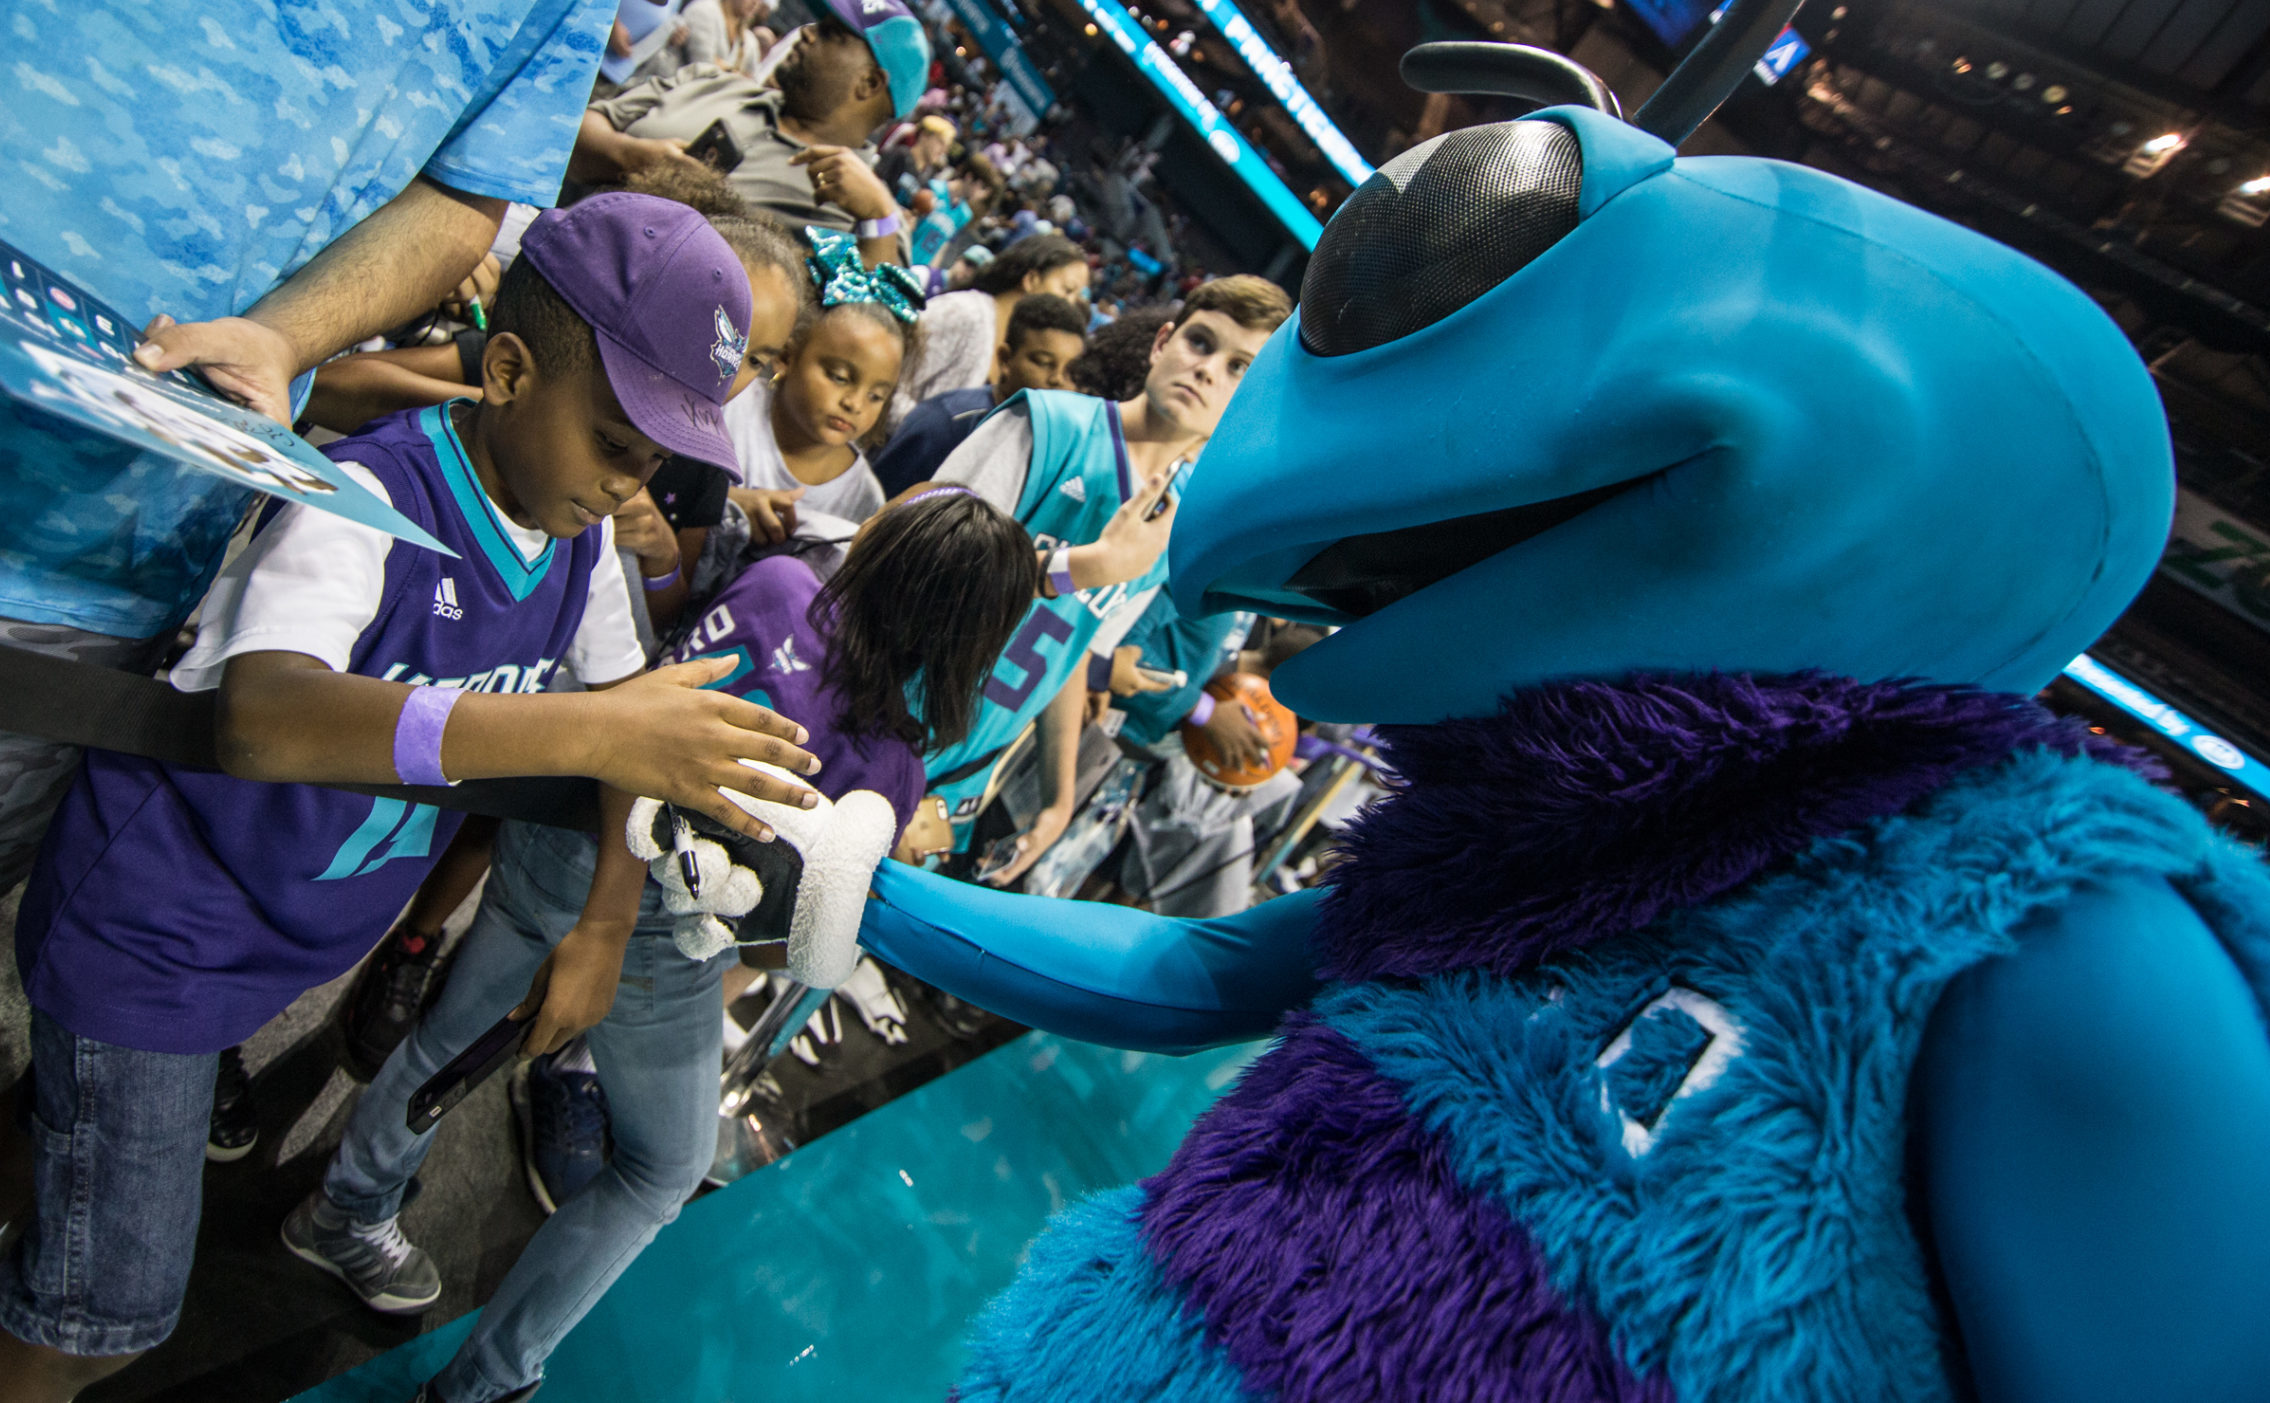 Hornets announce season theme nights and giveaways – WSOC TV